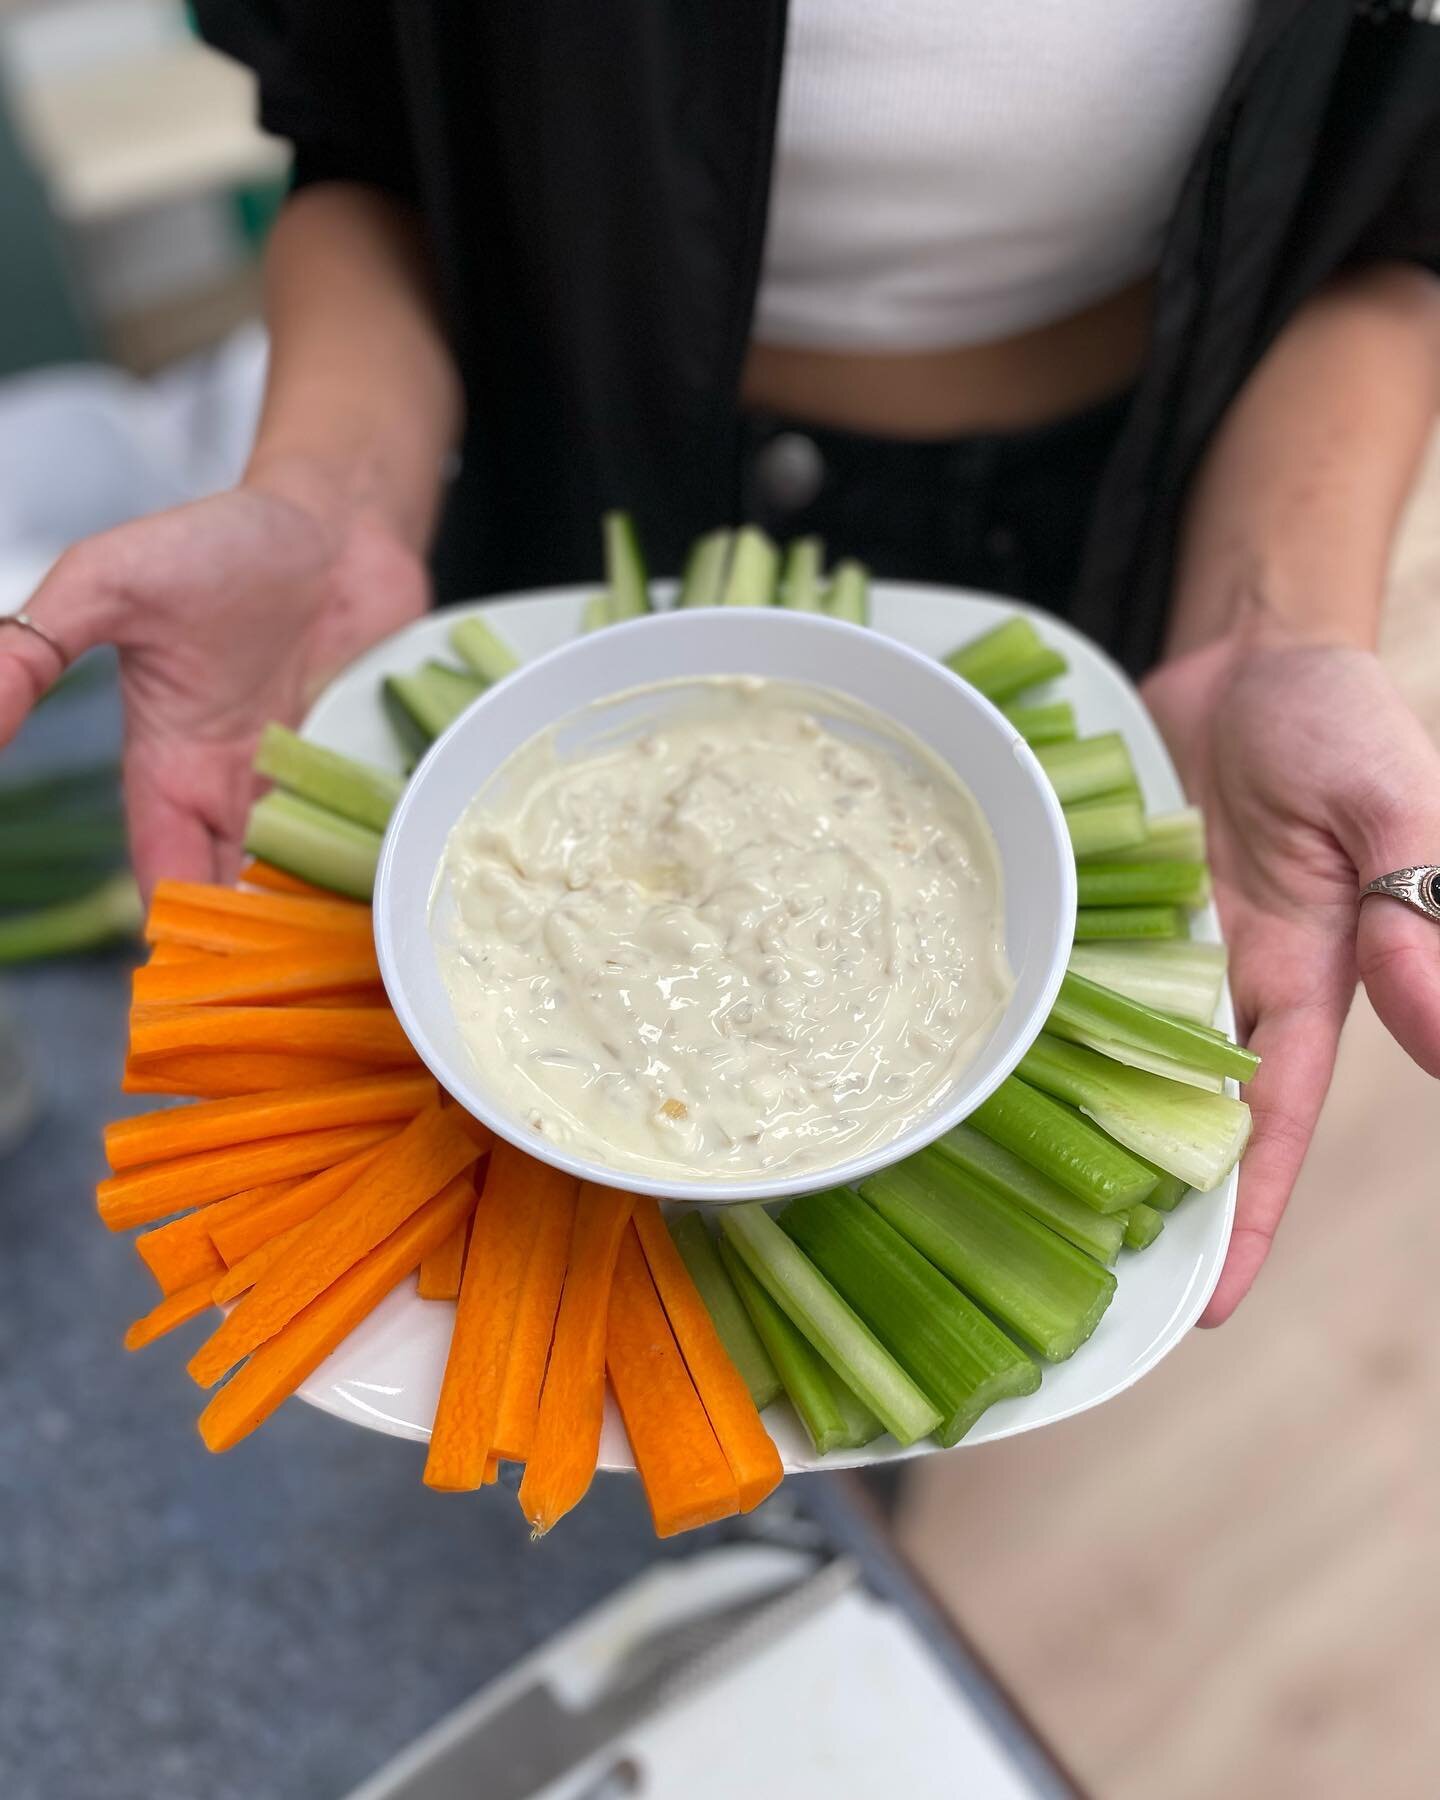 👩🏽&zwj;🍳 MASTERCHEF WINNING RECIPE 👩🏽&zwj;🍳
As promised, here is the winning recipe of this weeks MasterChef experience at Bunbury Community College, Greek yoghurt French onion dip🙌🏼 Not only was this delicious, but also a very easy, high pro